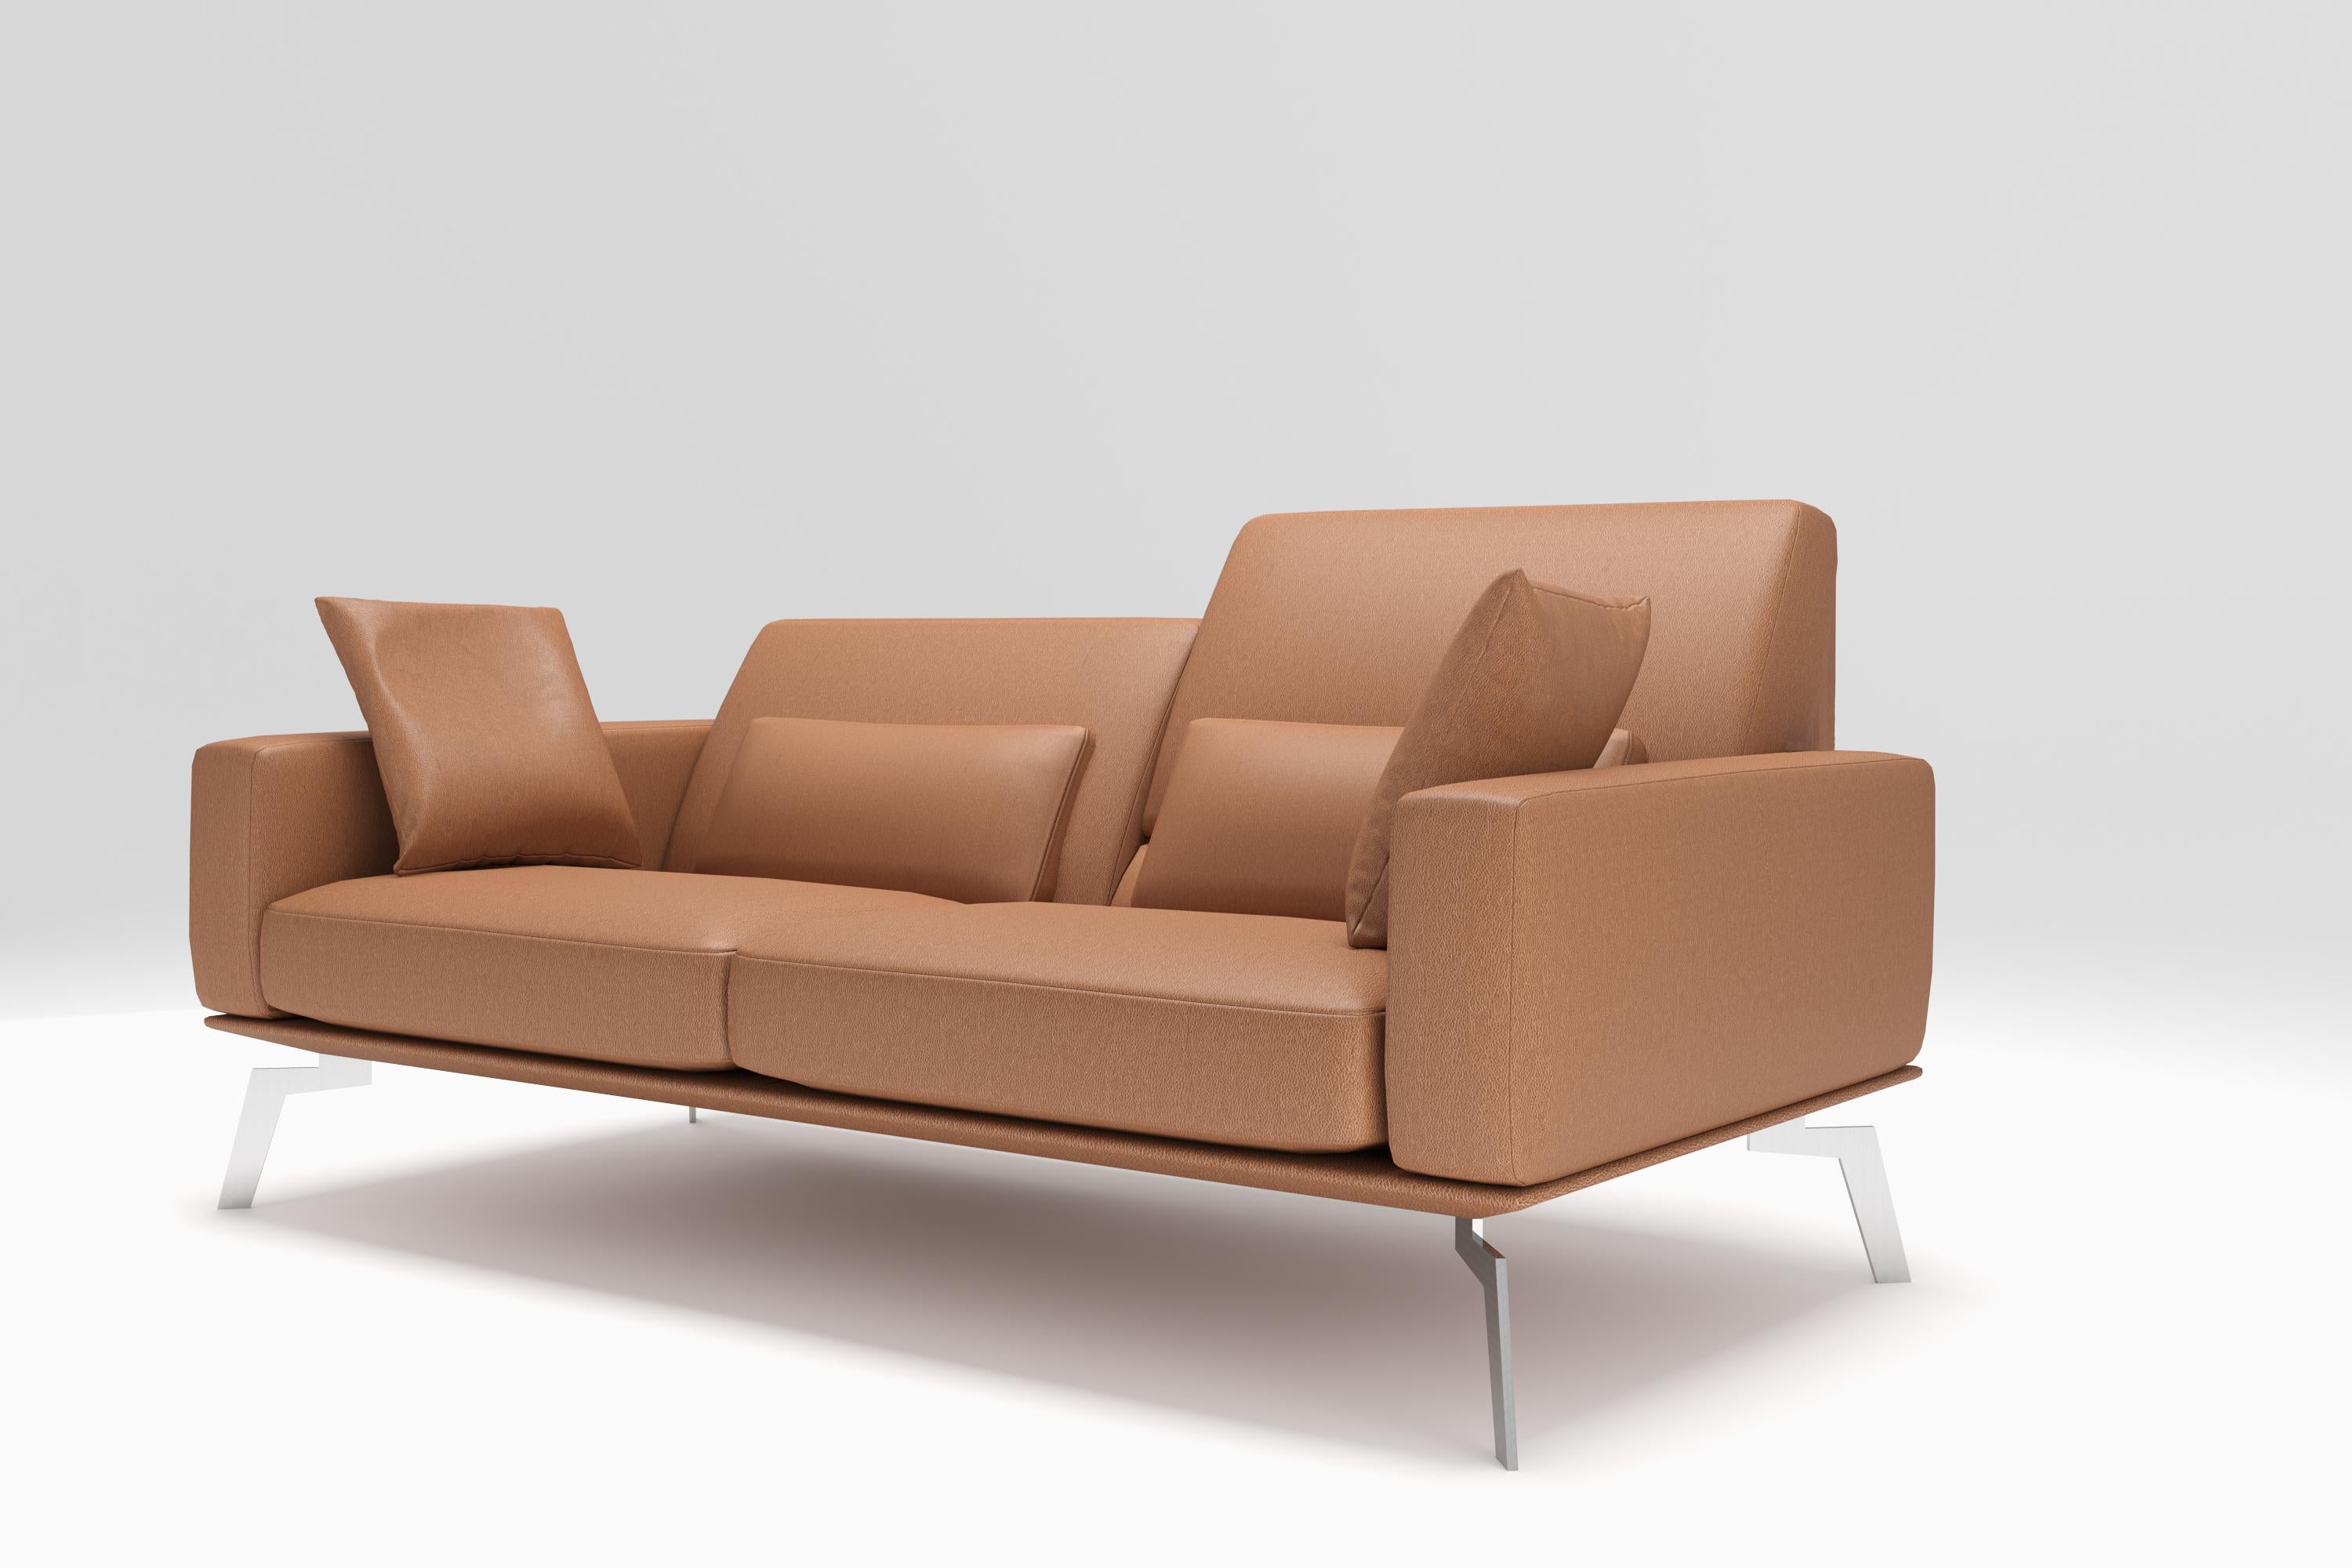 A floating island of tranquility with its slender form, the elegant DS-87 sofa model seems to float in the room, where it seamlessly fits into any modern environment, a piece of upholstered furniture at peace with itself, for the urban contemporary